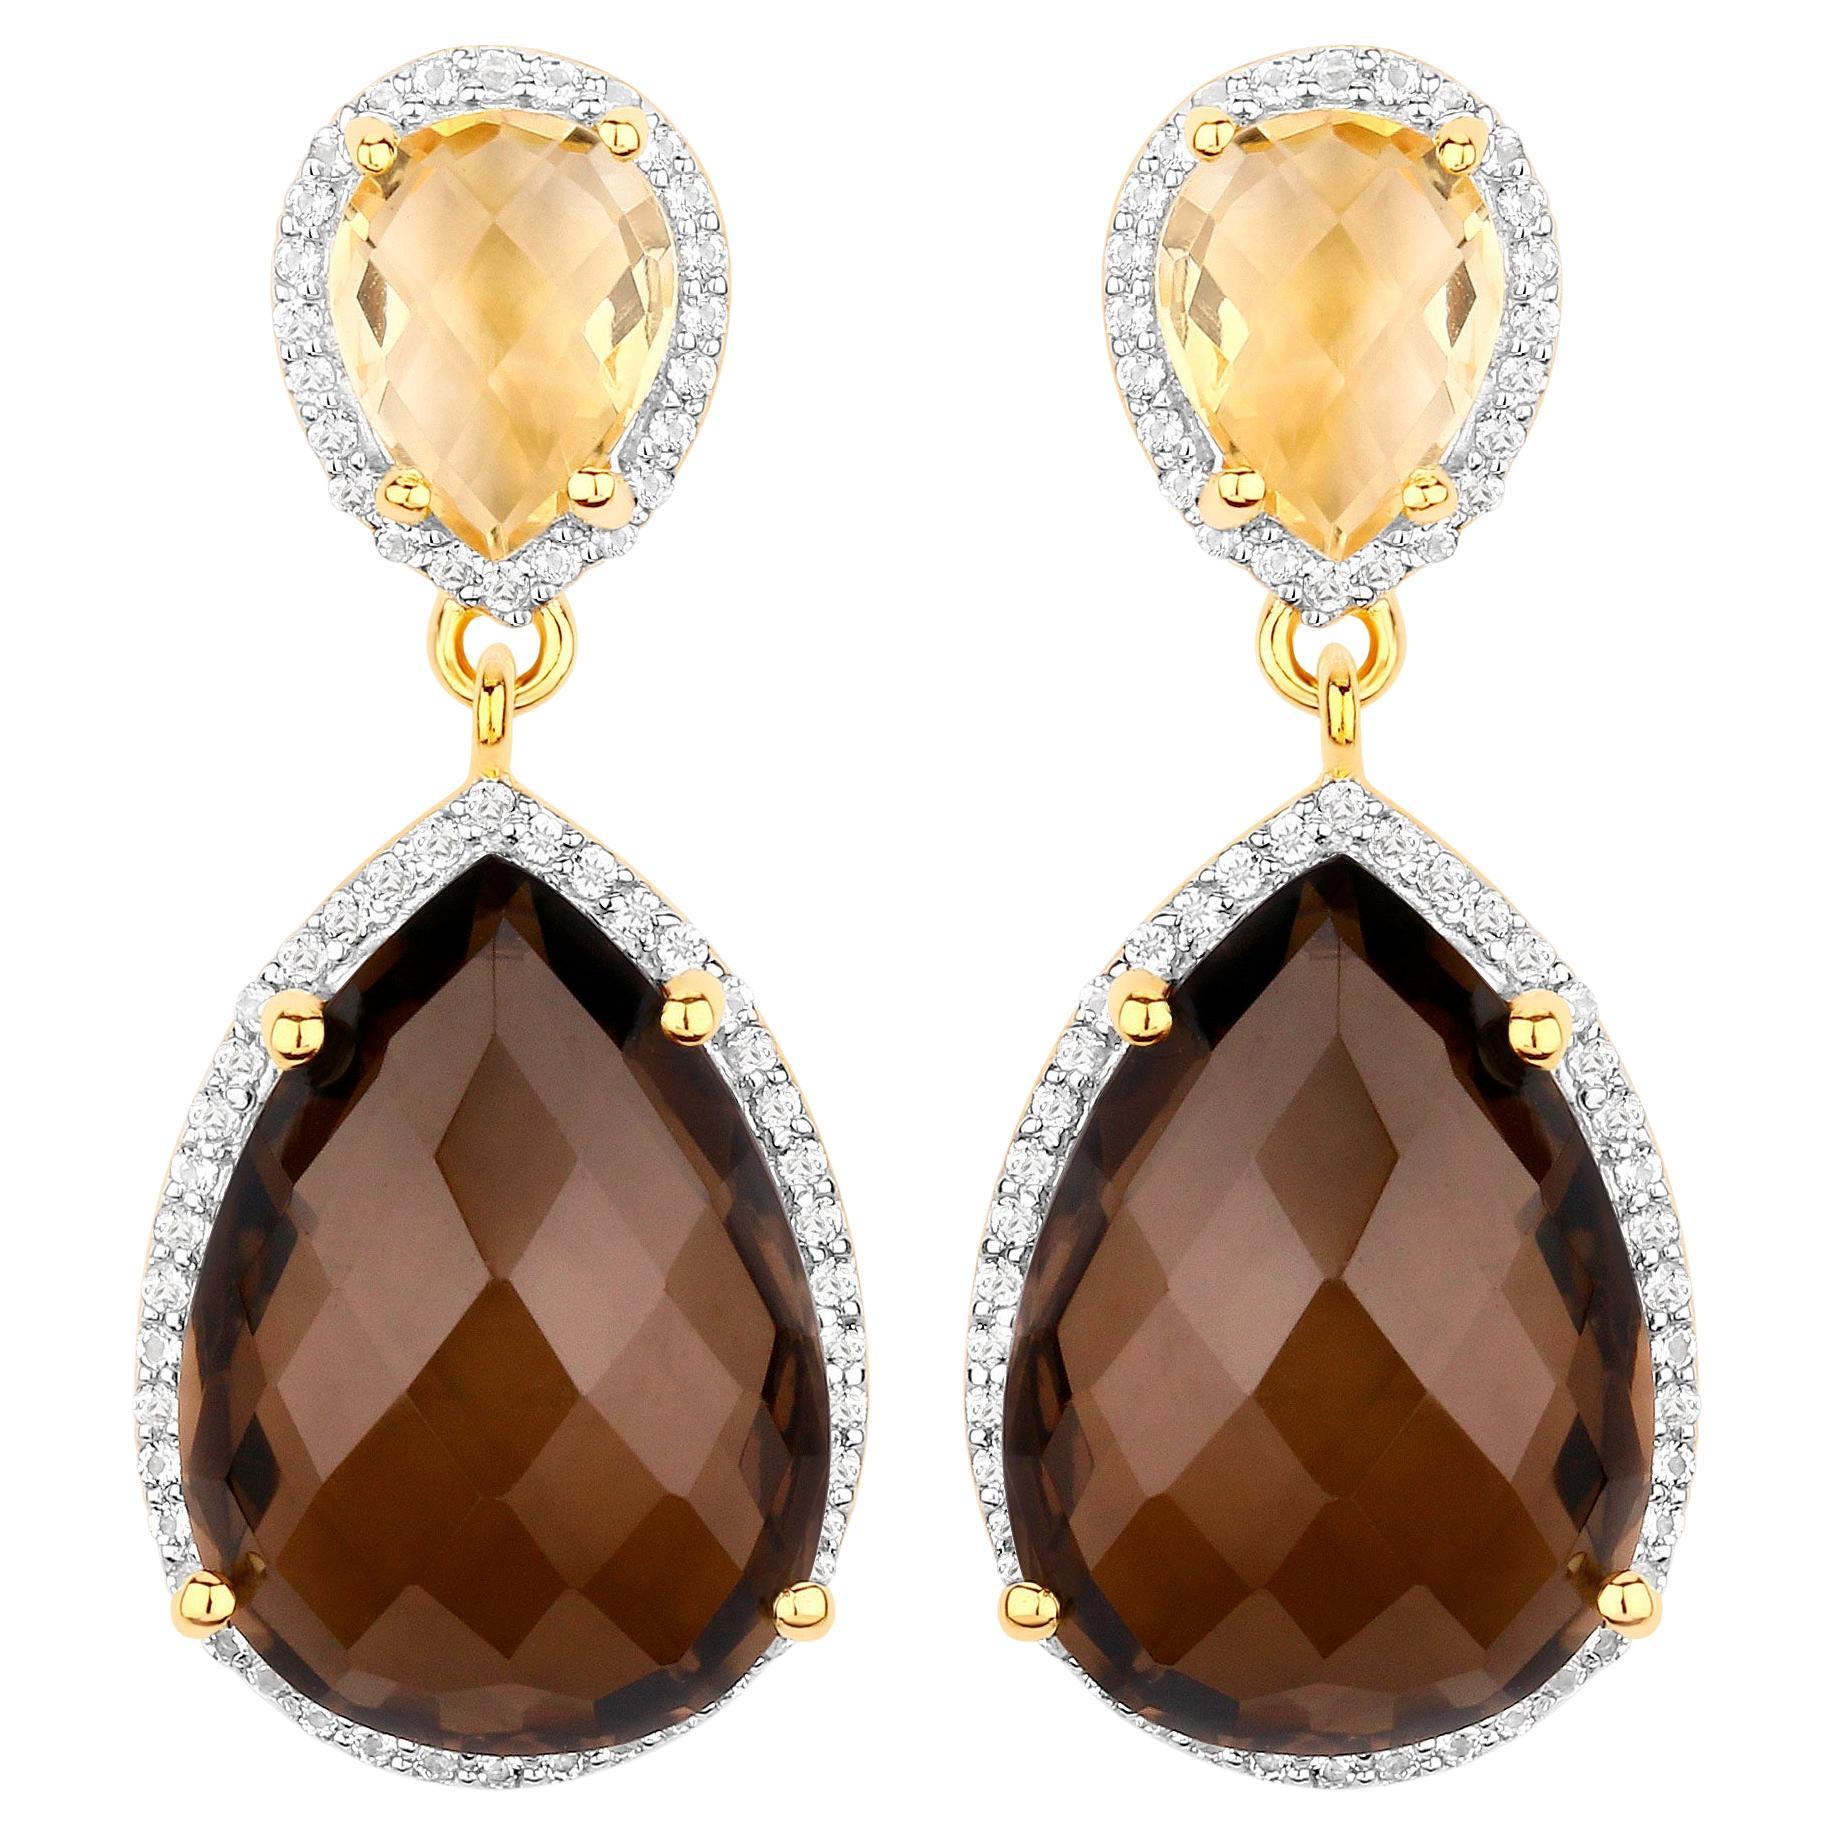 Smoky Quartz and Citrine Dangle Earrings 21 Carats 18K Gold Plated Silver